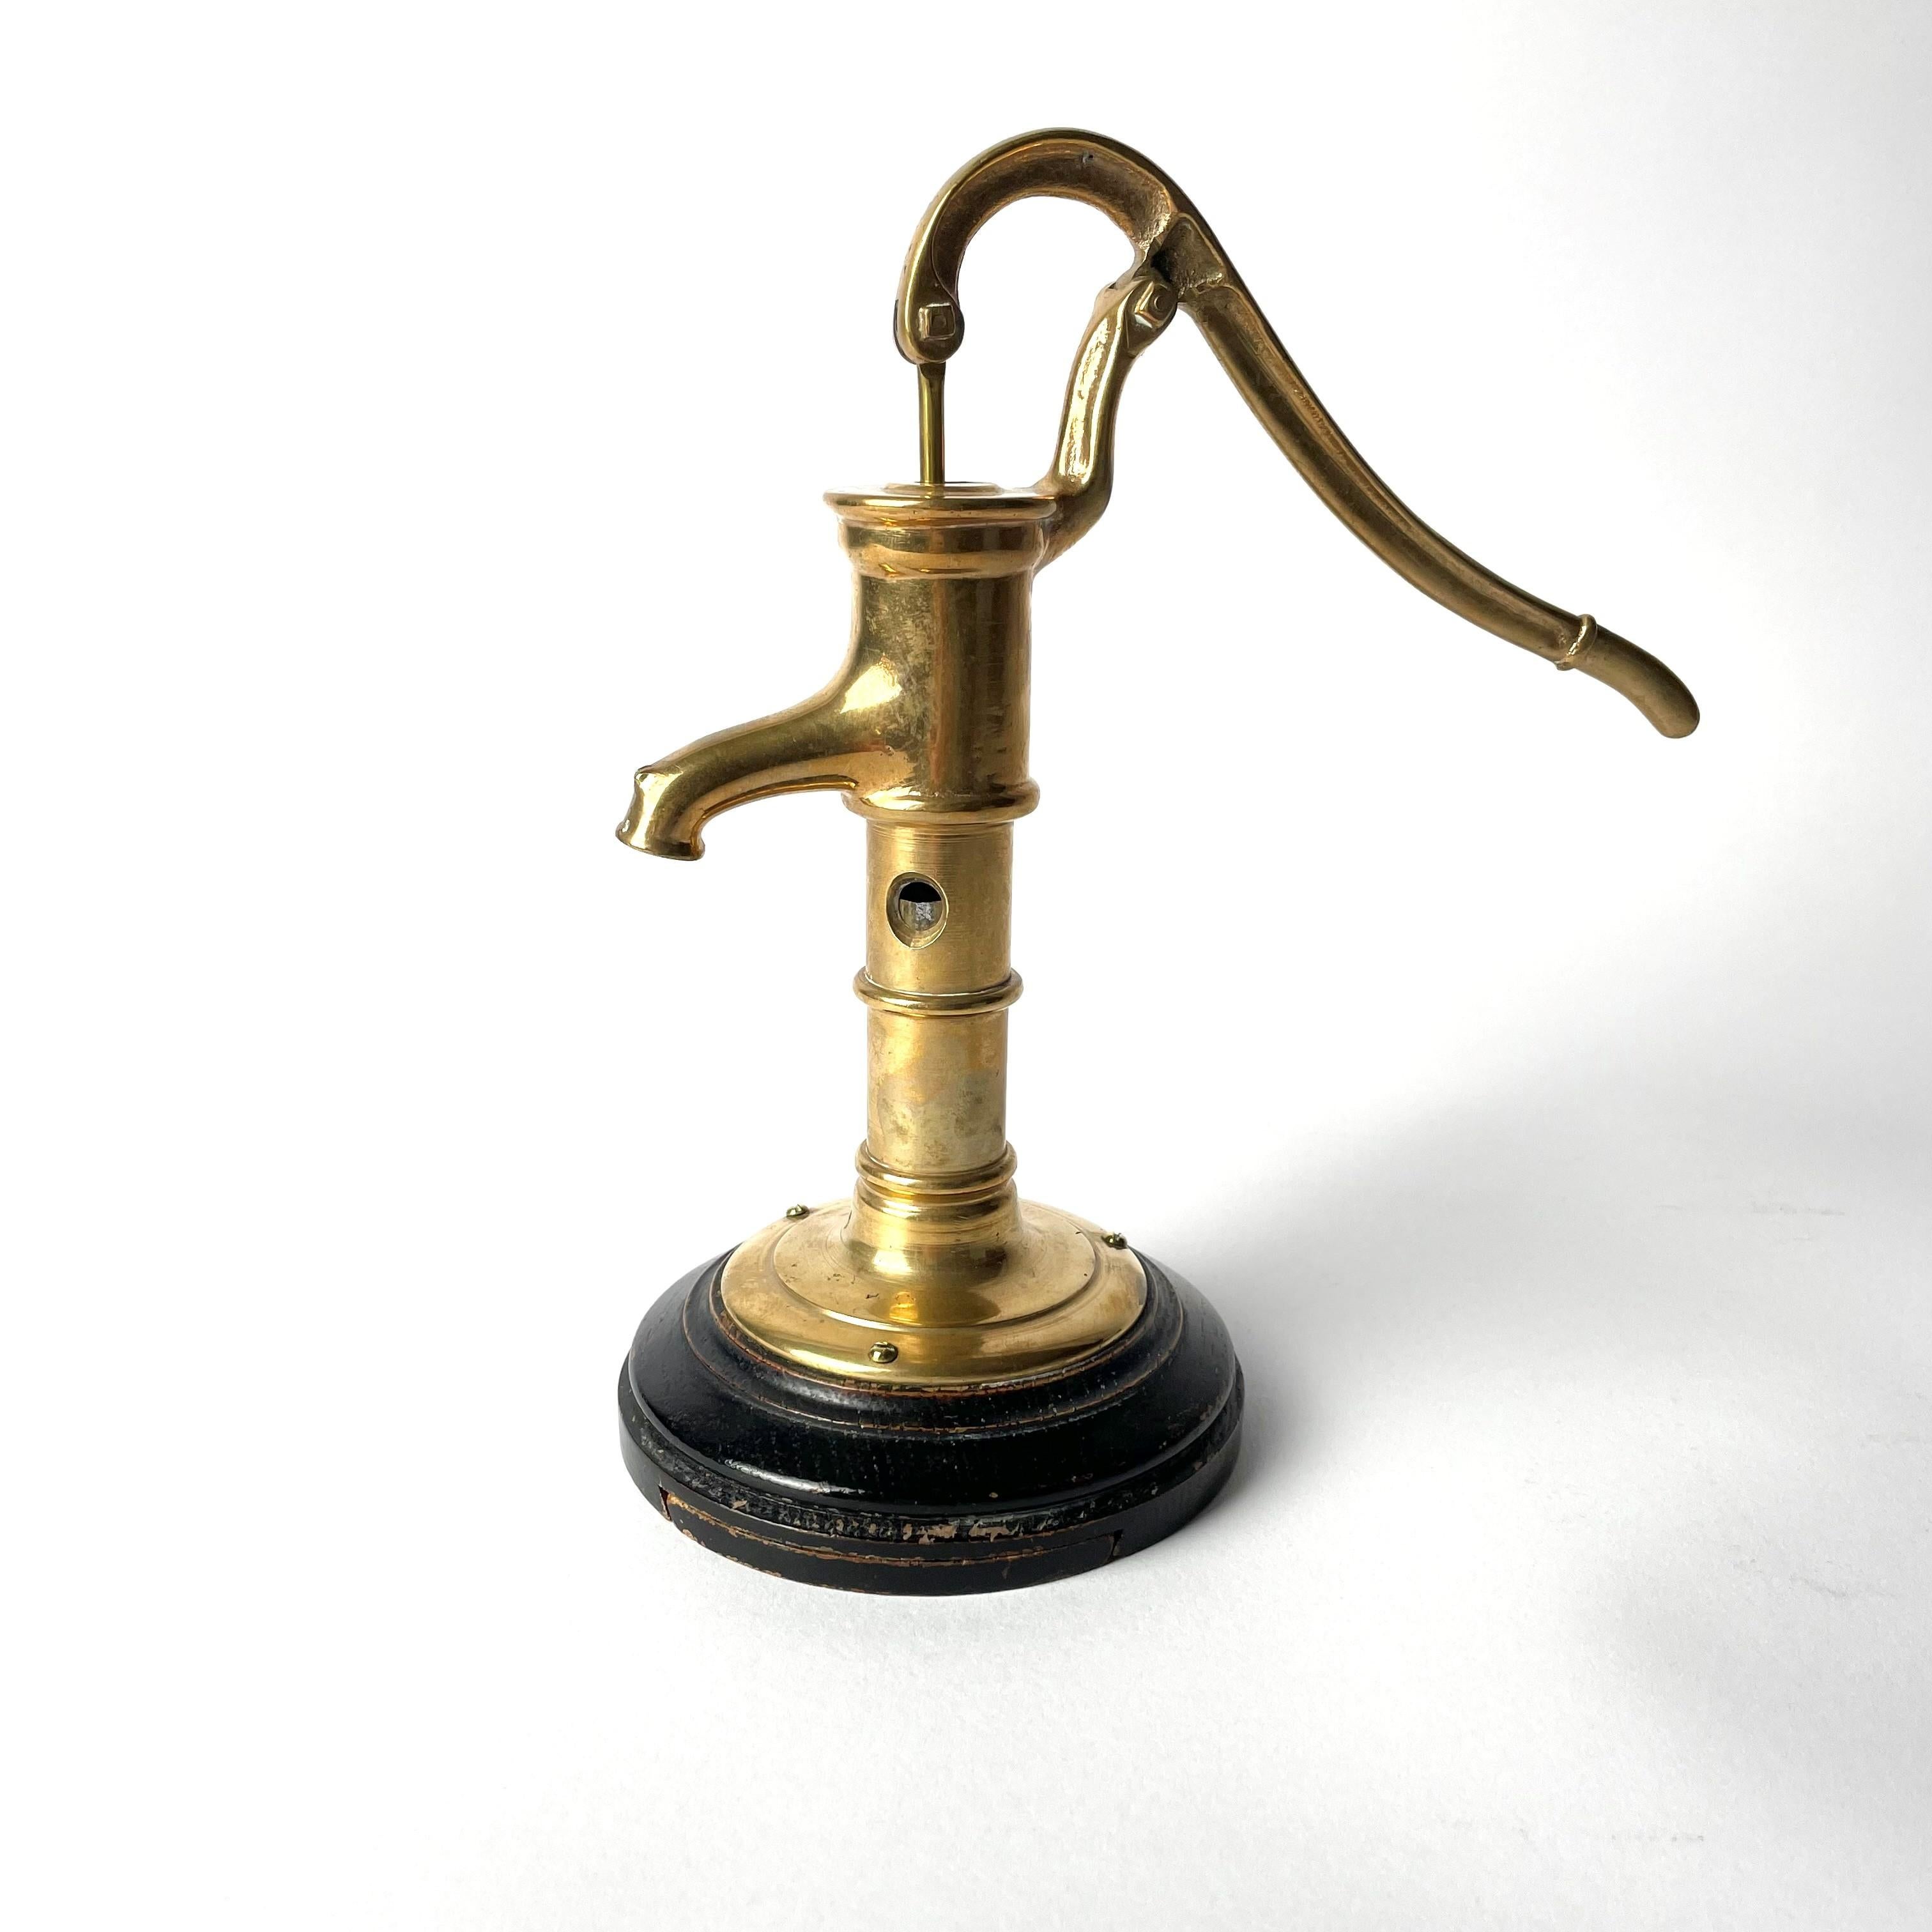 European Cigar Cutter in the Shape of a Pitcher Pump, Brass, Early 20th Century